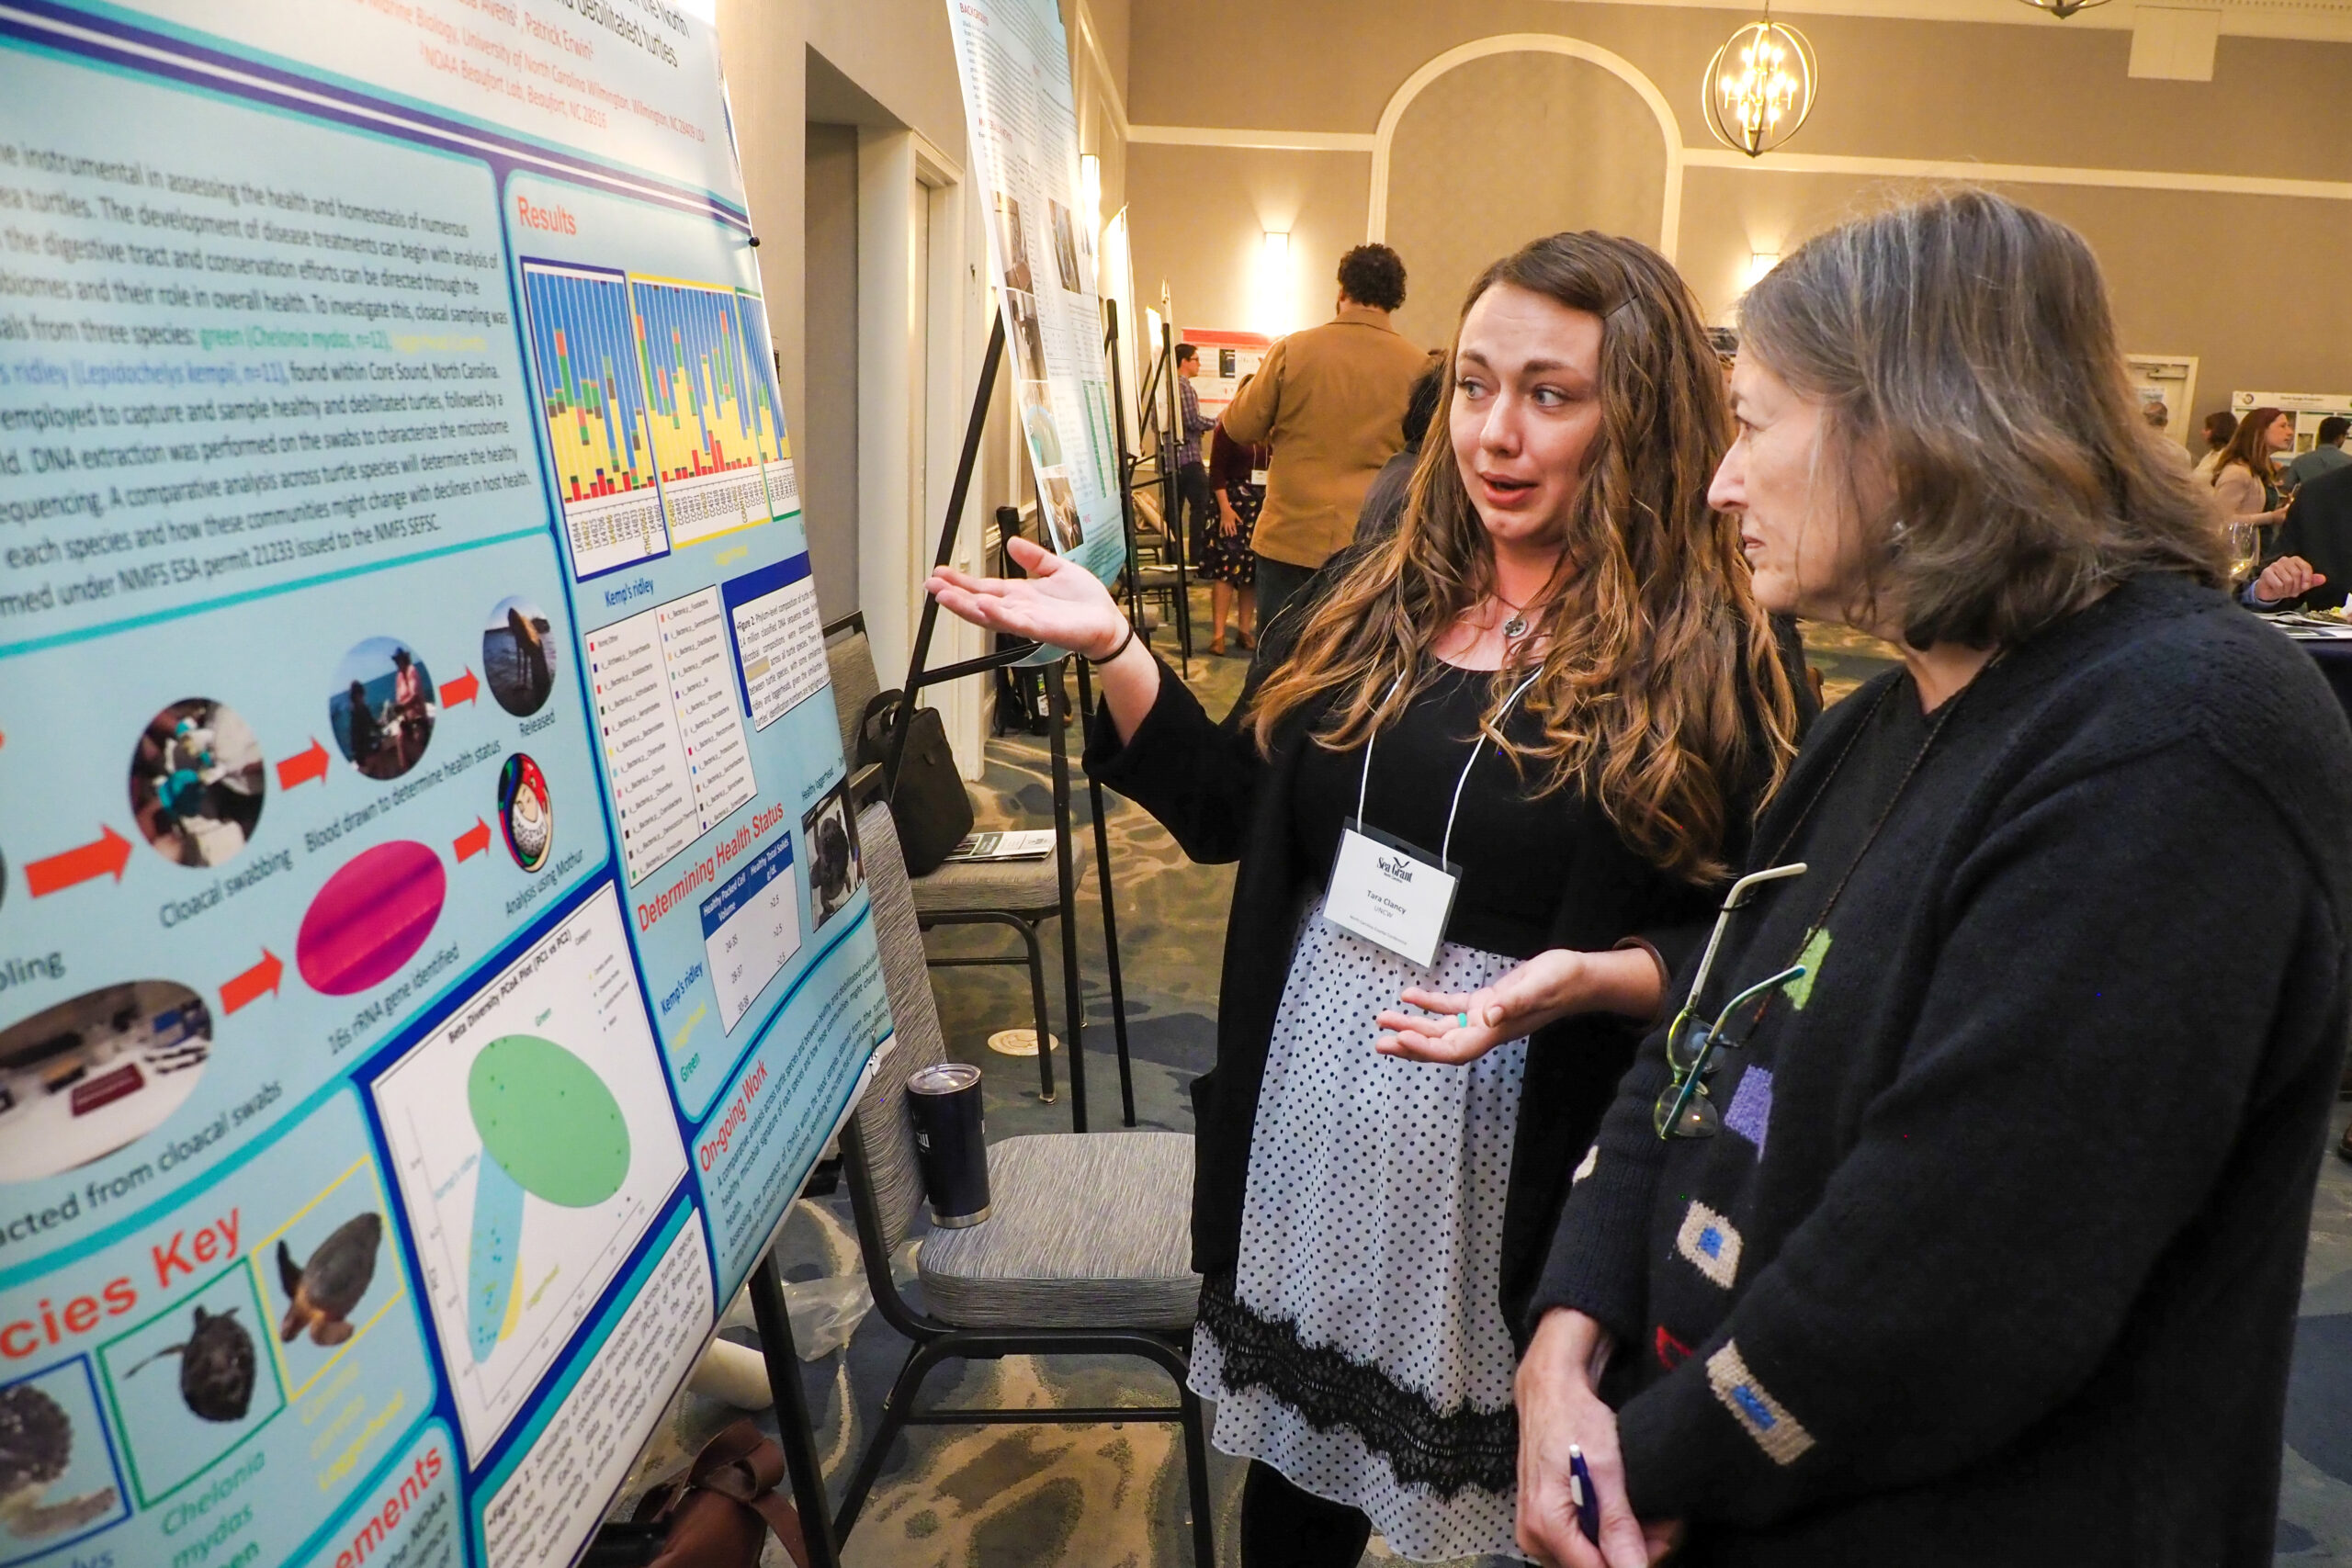 Graduate student Tara Clancy presents a research poster to an onlooker